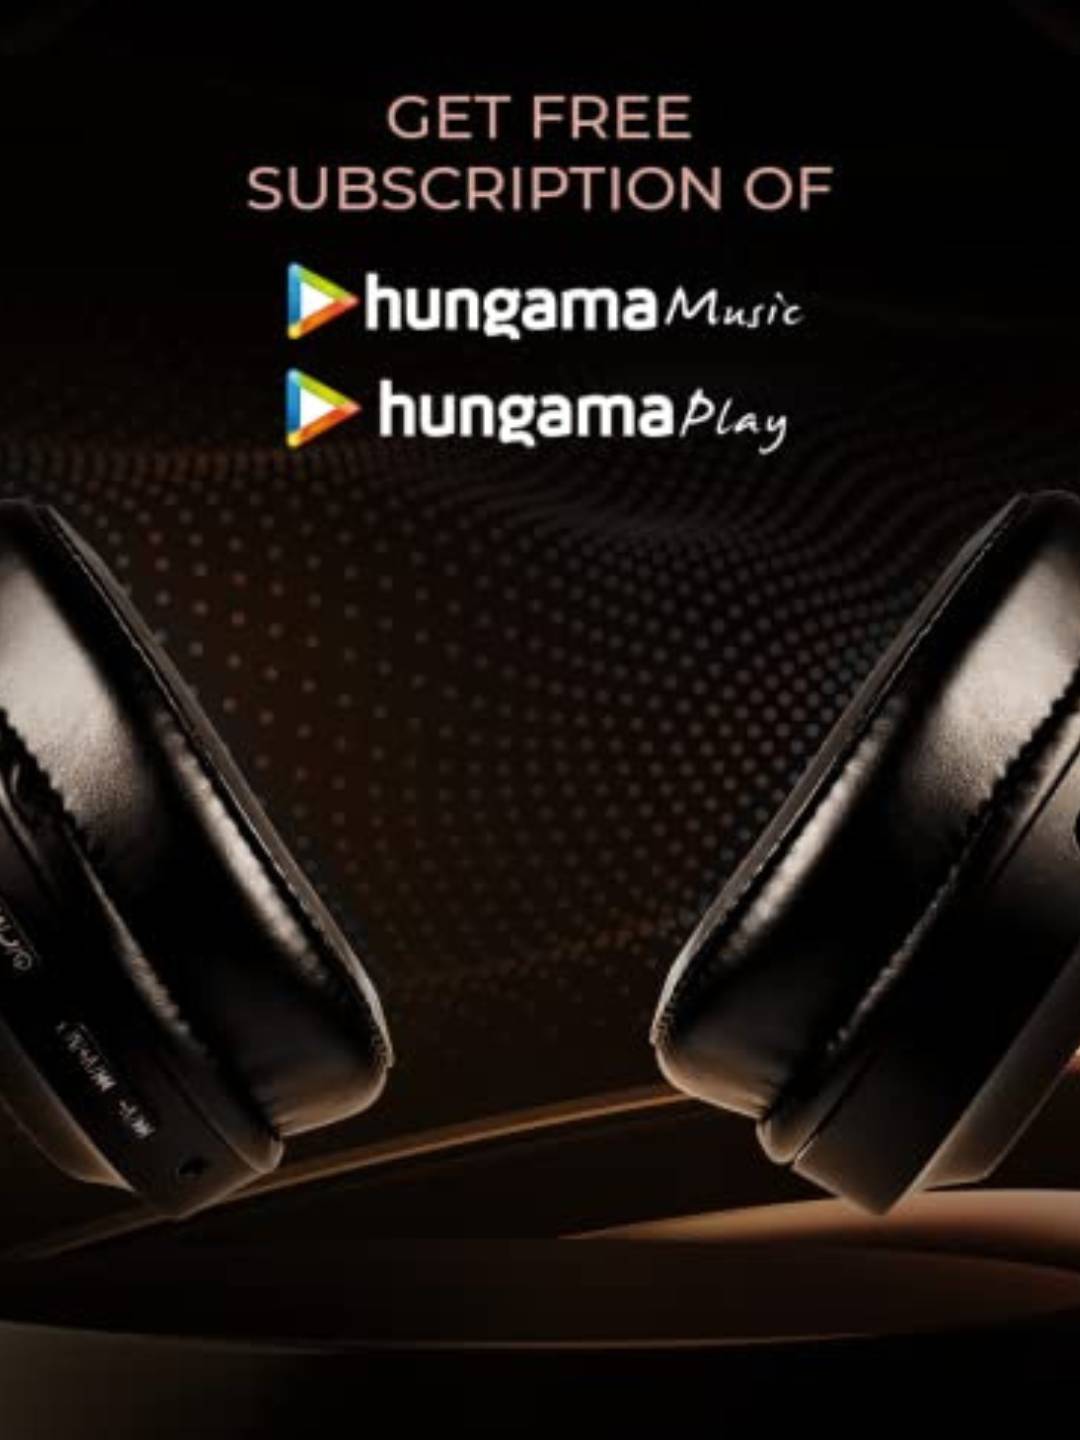 GET free subscription of Hungama music and play with buzz 101 headphones